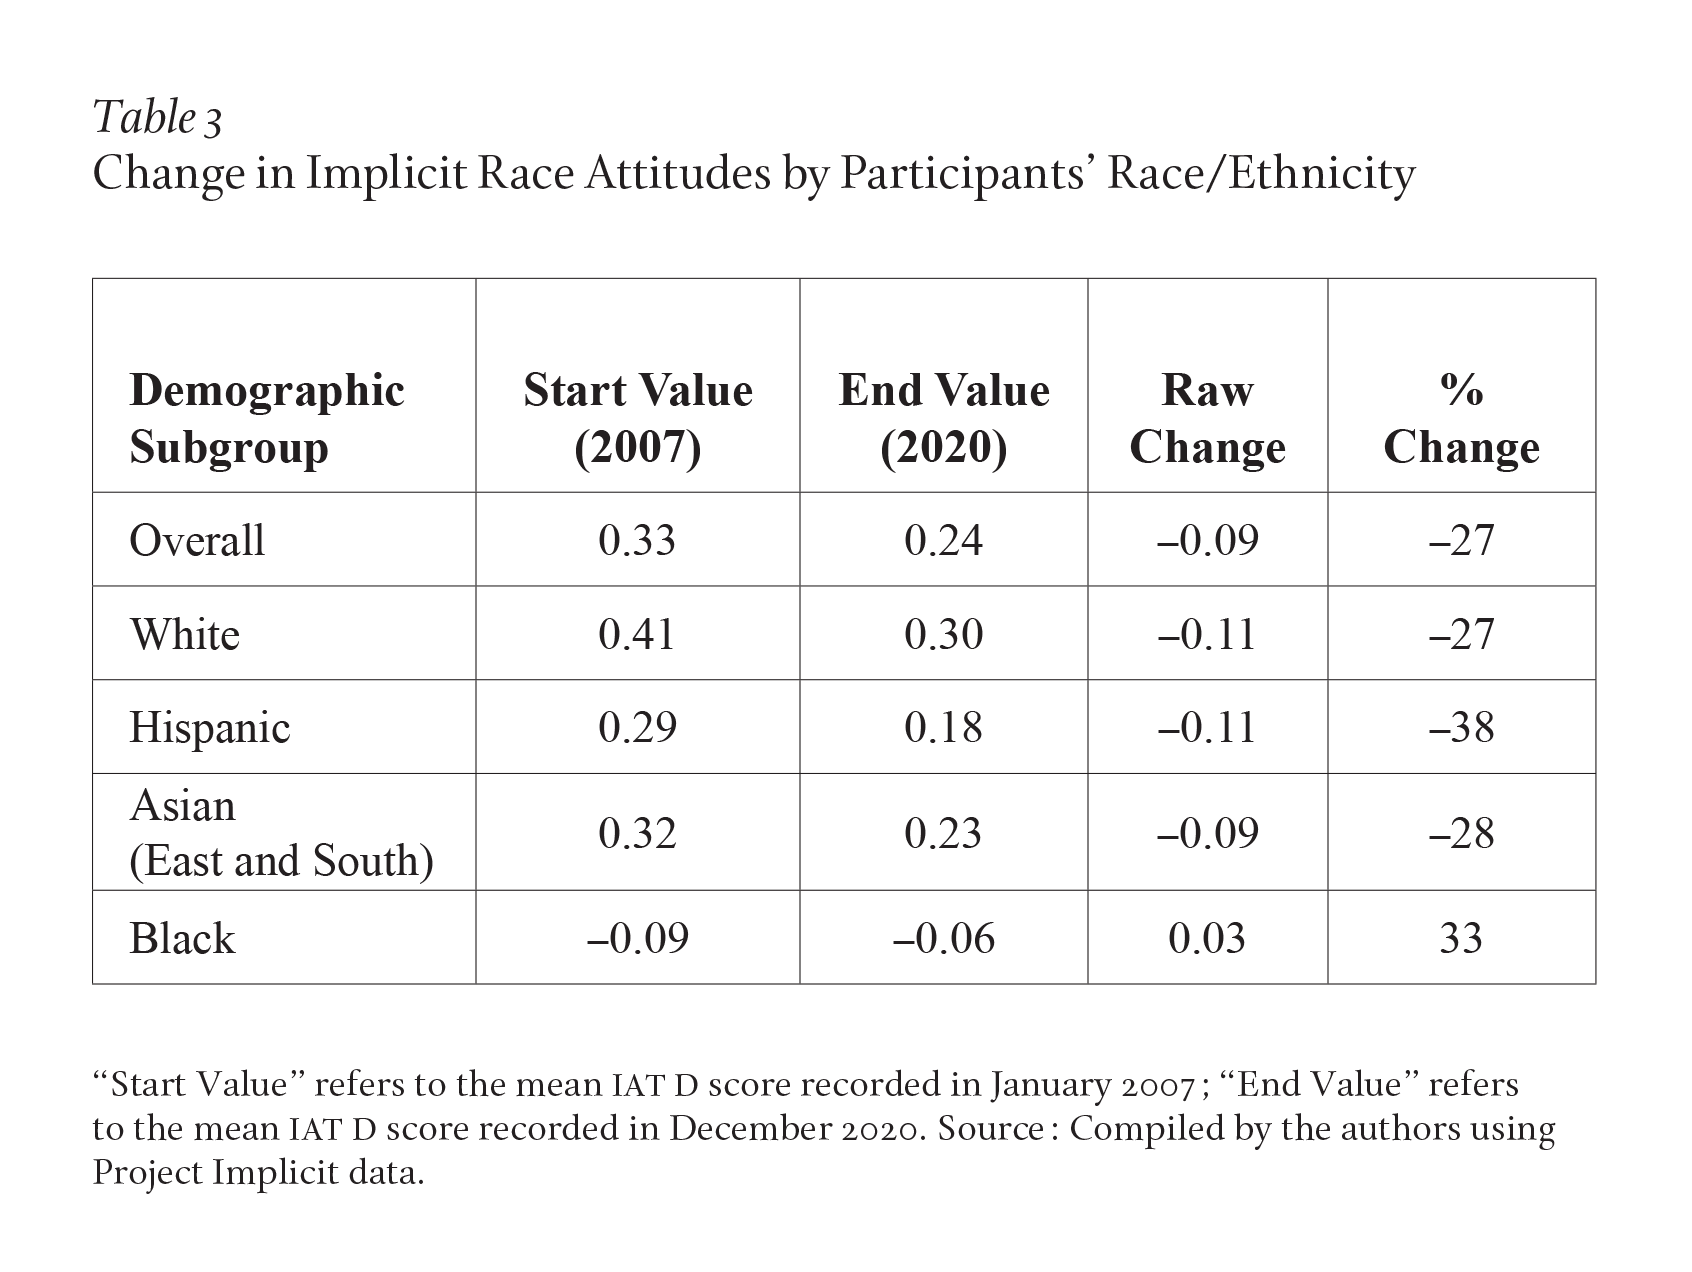 A table showing the change in results of the Implicit Association Test between 2007, when respondents initially took the test, and 2020, when they took the test again. For white respondents, rates of implicit bias decreased by 27%. For Hispanic respondents, by 38%. For East and South Asian respondents, by 28%. For Black respondents, rates of implicit bias increased by 33%. Overall, rates of implicit bias decreased by 27%.